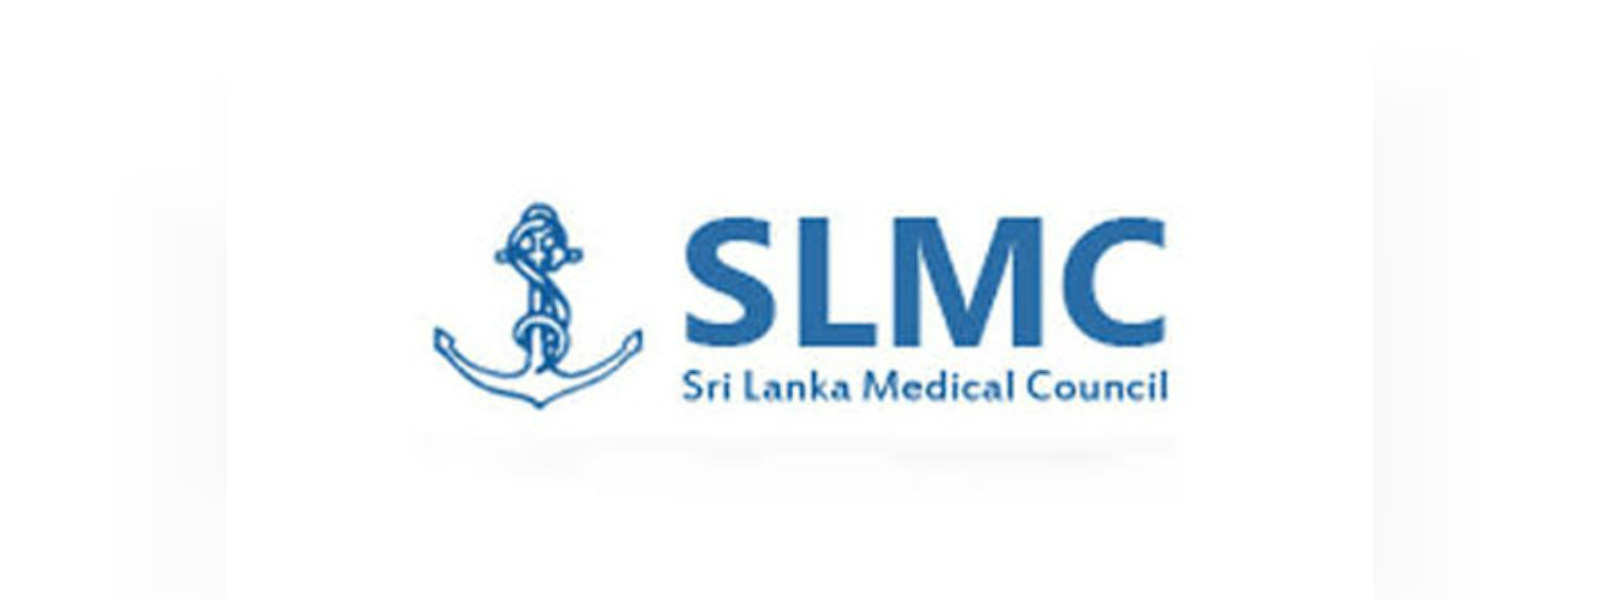 Let SLMC operate independently: Former Members